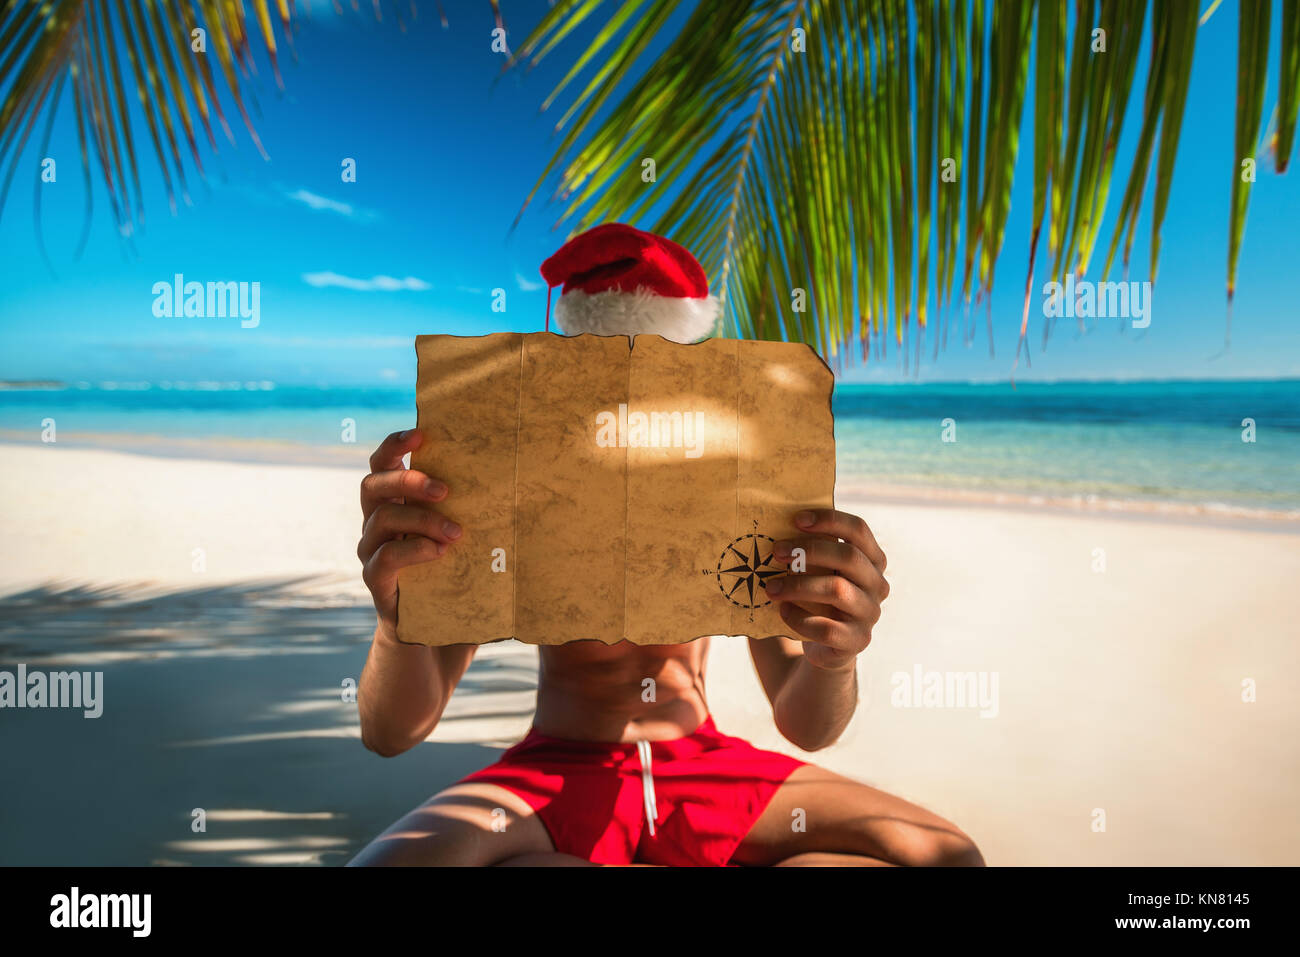 Tourist man with Santa Claus hat relaxing on tropical island beach. Punta Cana, Dominican Republic. Stock Photo